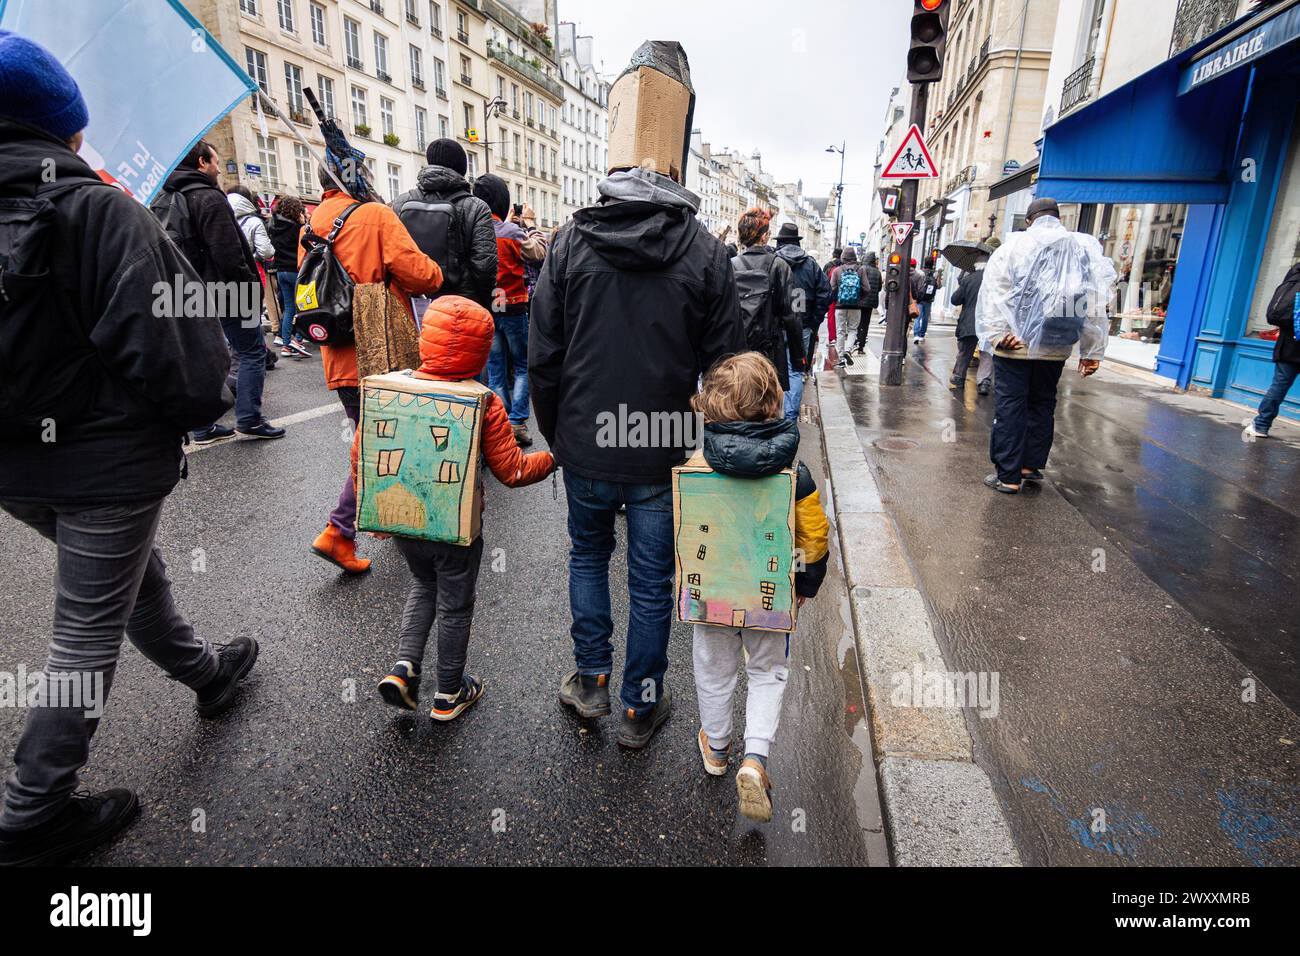 A man with a paper house on his head walks with his two kids with paper houses inform of backpacks, during the demonstration against the housing crisis. Thousands of people attended the demonstration for the right to housing, in Paris. The movement organized by the association 'DAL' Droit Au Logement (Right to Housing), focused on denouncing the start of evictions that will begin at the beginning of April. It was also demanded a reduction in rents, the requisition of empty houses for rent, accommodation for all inhabitants and an end to real estate speculation. Stock Photo